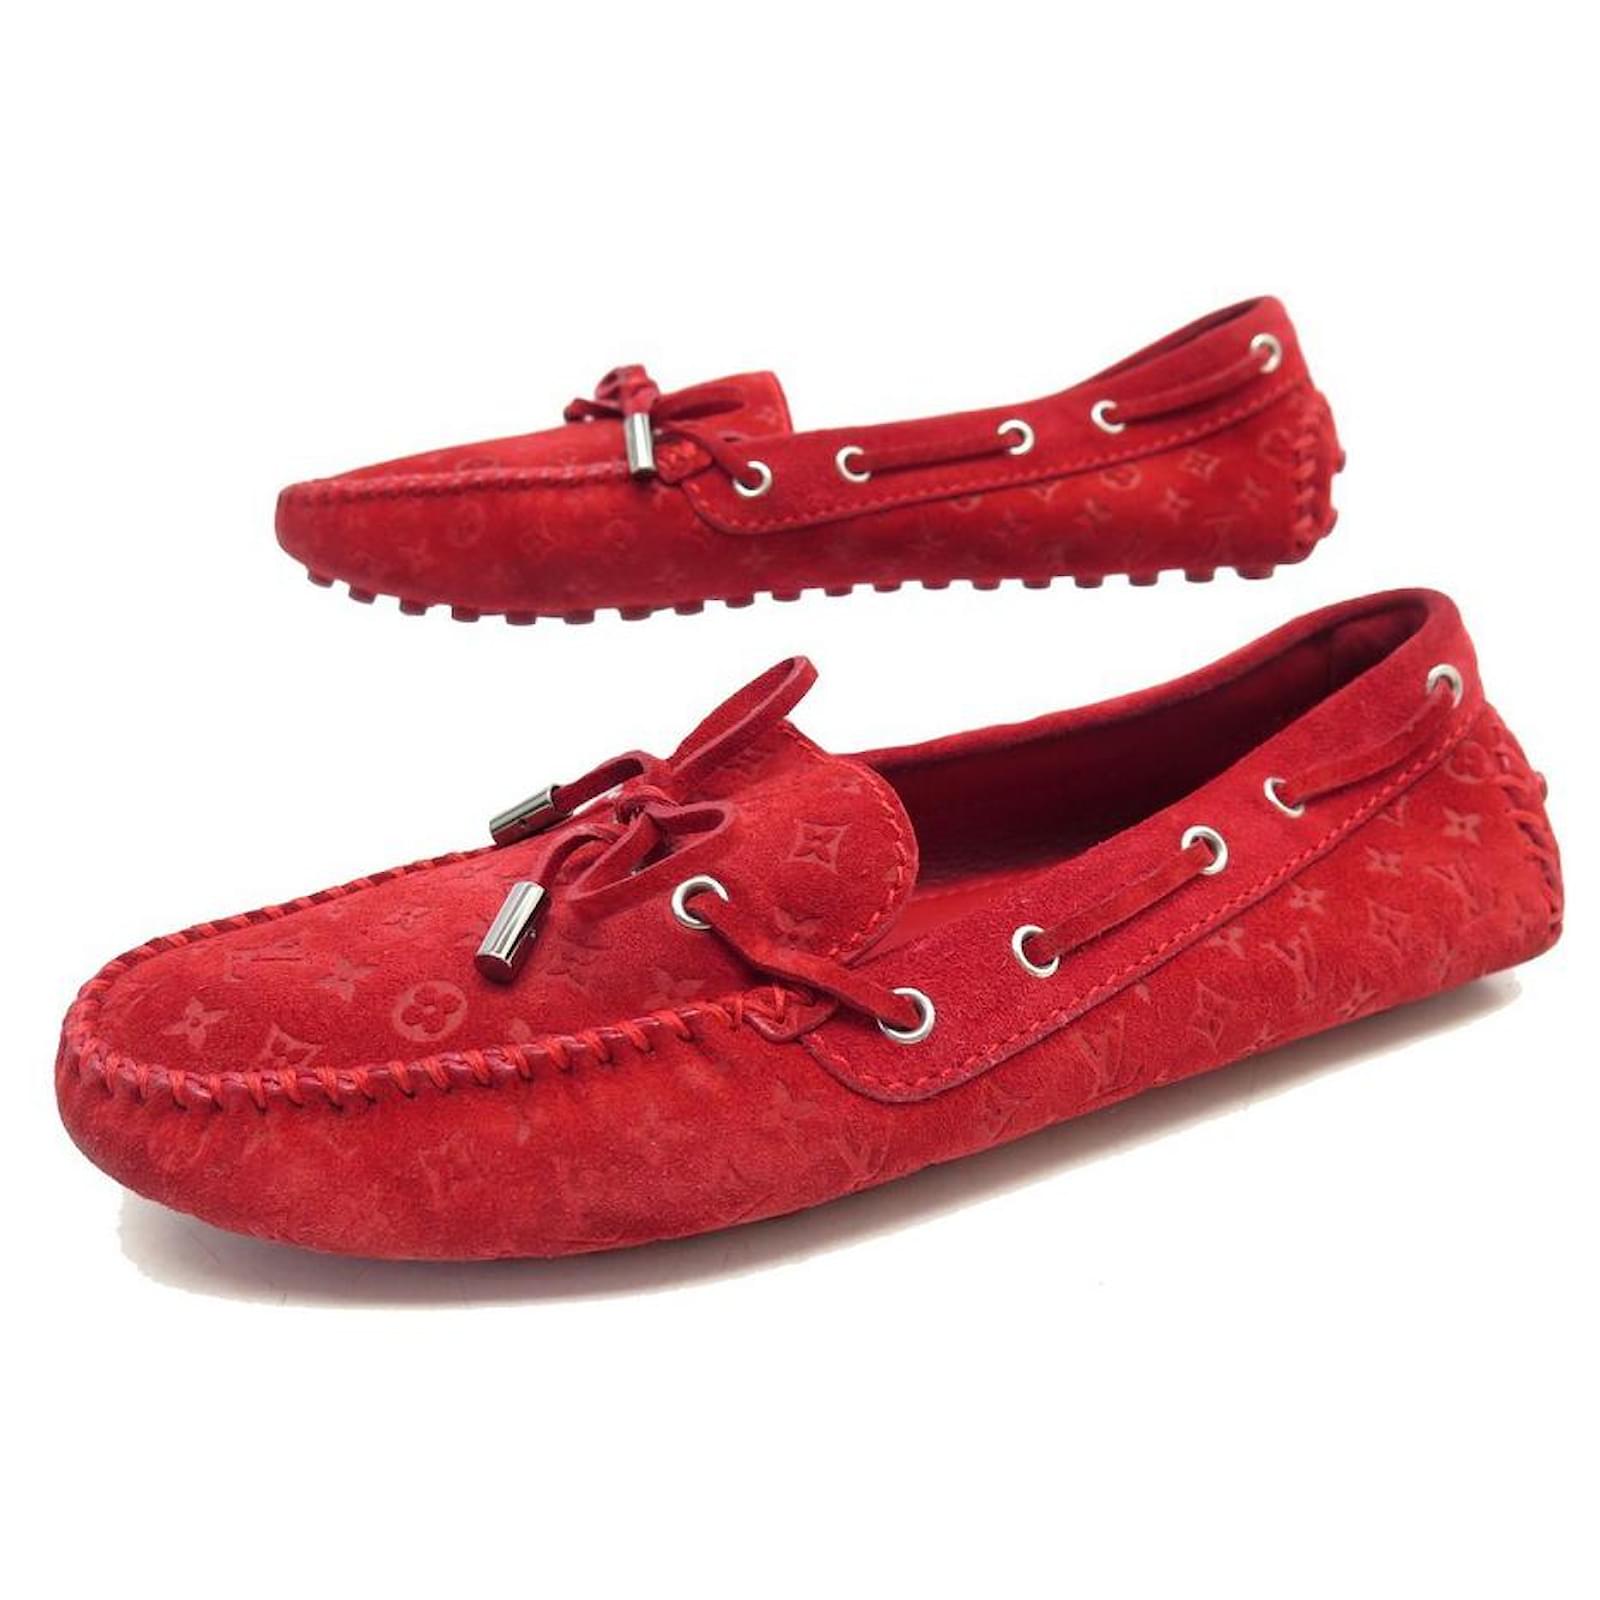 LOUIS VUITTON DRIVER MOCCASIN SHOES 38 RED SUEDE RED LOAFERS SHOES